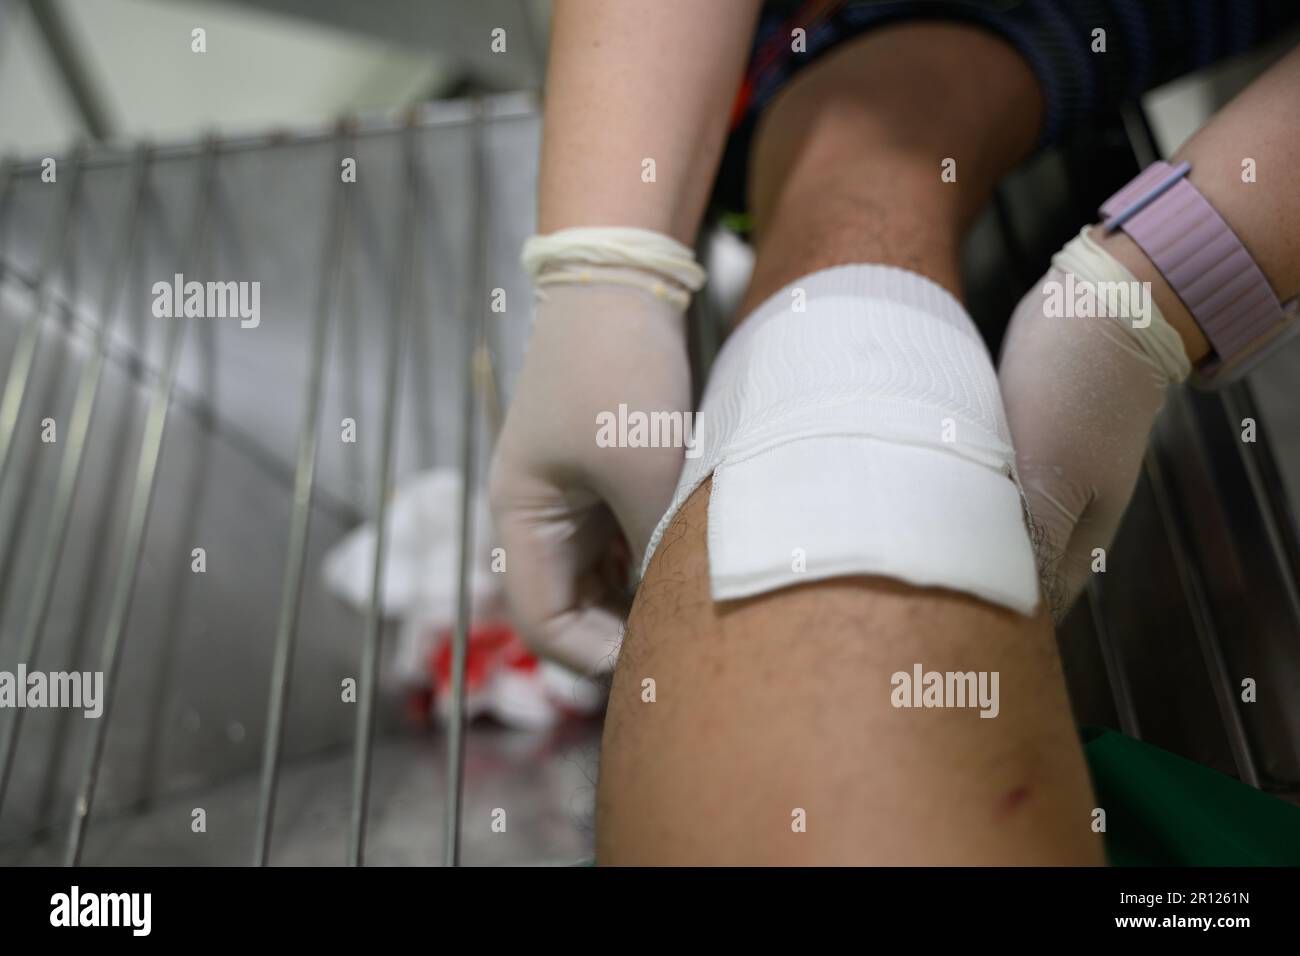 Nurses are treating a bleeding wound on the leg caused by an accident Stock Photo